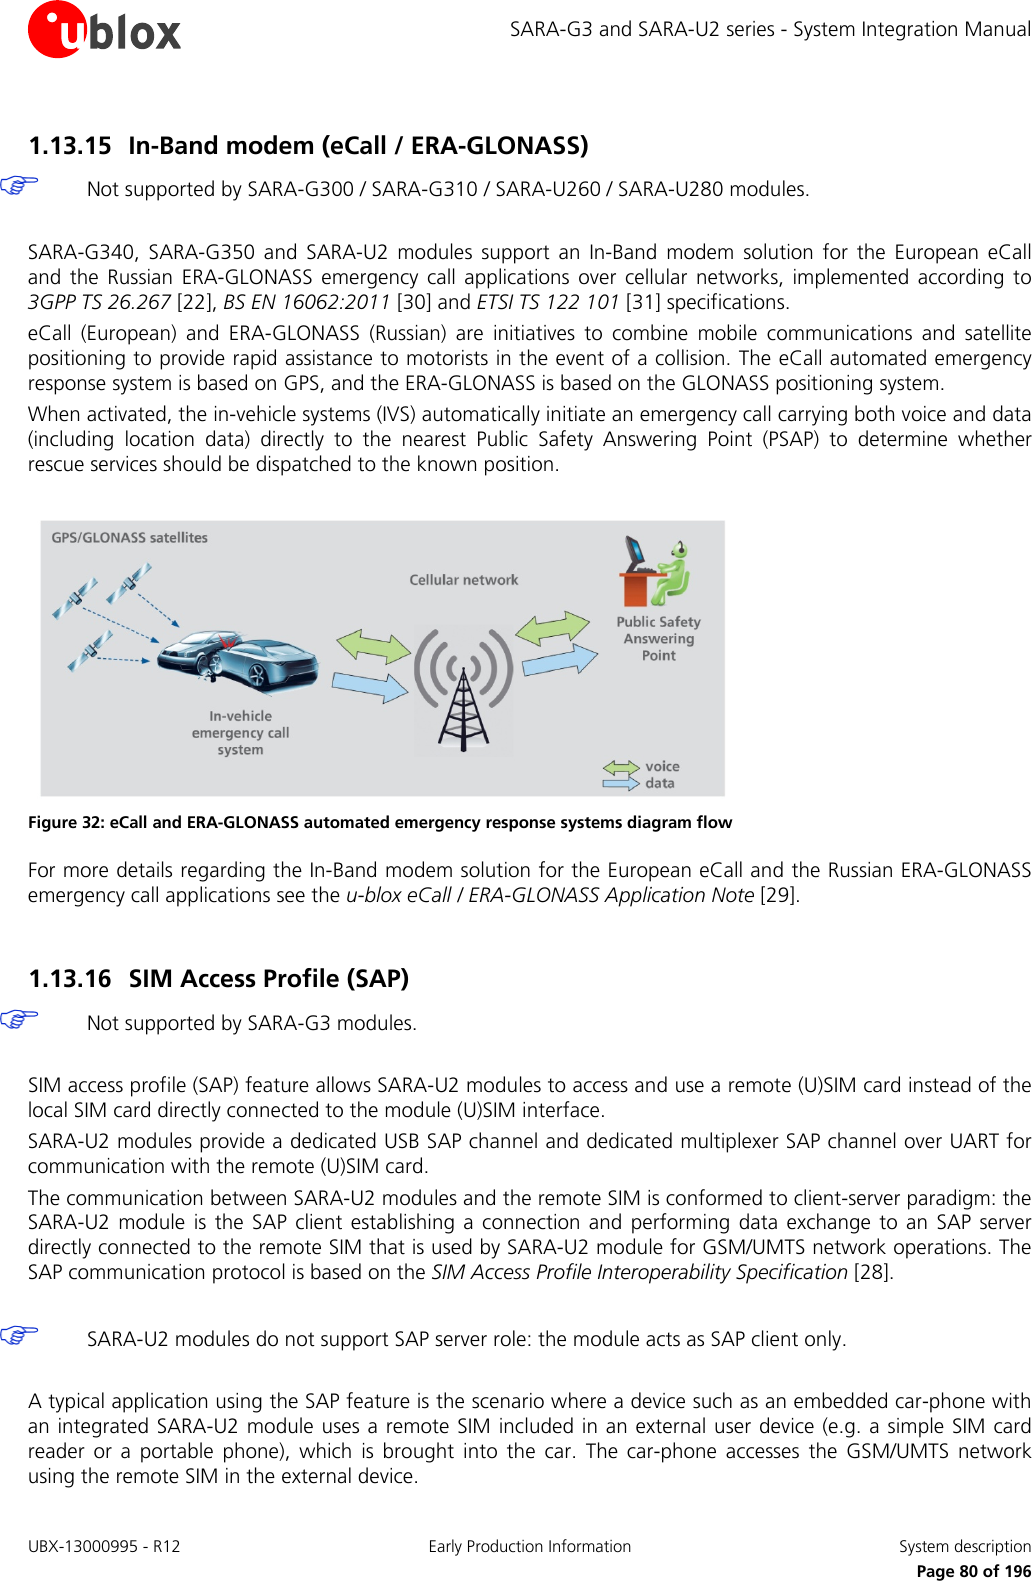 SARA-G3 and SARA-U2 series - System Integration Manual 1.13.15 In-Band modem (eCall / ERA-GLONASS)  Not supported by SARA-G300 / SARA-G310 / SARA-U260 / SARA-U280 modules.  SARA-G340, SARA-G350 and SARA-U2 modules support an In-Band modem solution for the European eCall and  the Russian ERA-GLONASS emergency call applications over  cellular networks, implemented according to 3GPP TS 26.267 [22], BS EN 16062:2011 [30] and ETSI TS 122 101 [31] specifications. eCall  (European)  and ERA-GLONASS  (Russian) are initiatives  to combine mobile communications and satellite positioning to provide rapid assistance to motorists in the event of a collision. The eCall automated emergency response system is based on GPS, and the ERA-GLONASS is based on the GLONASS positioning system. When activated, the in-vehicle systems (IVS) automatically initiate an emergency call carrying both voice and data (including location data) directly to the nearest Public Safety Answering Point (PSAP)  to determine whether rescue services should be dispatched to the known position.   Figure 32: eCall and ERA-GLONASS automated emergency response systems diagram flow For more details regarding the In-Band modem solution for the European eCall and the Russian ERA-GLONASS emergency call applications see the u-blox eCall / ERA-GLONASS Application Note [29].  1.13.16 SIM Access Profile (SAP)  Not supported by SARA-G3 modules.  SIM access profile (SAP) feature allows SARA-U2 modules to access and use a remote (U)SIM card instead of the local SIM card directly connected to the module (U)SIM interface. SARA-U2 modules provide a dedicated USB SAP channel and dedicated multiplexer SAP channel over UART for communication with the remote (U)SIM card. The communication between SARA-U2 modules and the remote SIM is conformed to client-server paradigm: the SARA-U2 module is the SAP client establishing a connection and performing data exchange to an SAP server directly connected to the remote SIM that is used by SARA-U2 module for GSM/UMTS network operations. The SAP communication protocol is based on the SIM Access Profile Interoperability Specification [28].   SARA-U2 modules do not support SAP server role: the module acts as SAP client only.  A typical application using the SAP feature is the scenario where a device such as an embedded car-phone with an integrated SARA-U2 module uses a remote SIM included in an external user device (e.g. a simple SIM card reader or a portable phone), which is brought into the car. The car-phone accesses the GSM/UMTS network using the remote SIM in the external device. UBX-13000995 - R12 Early Production Information System description     Page 80 of 196 